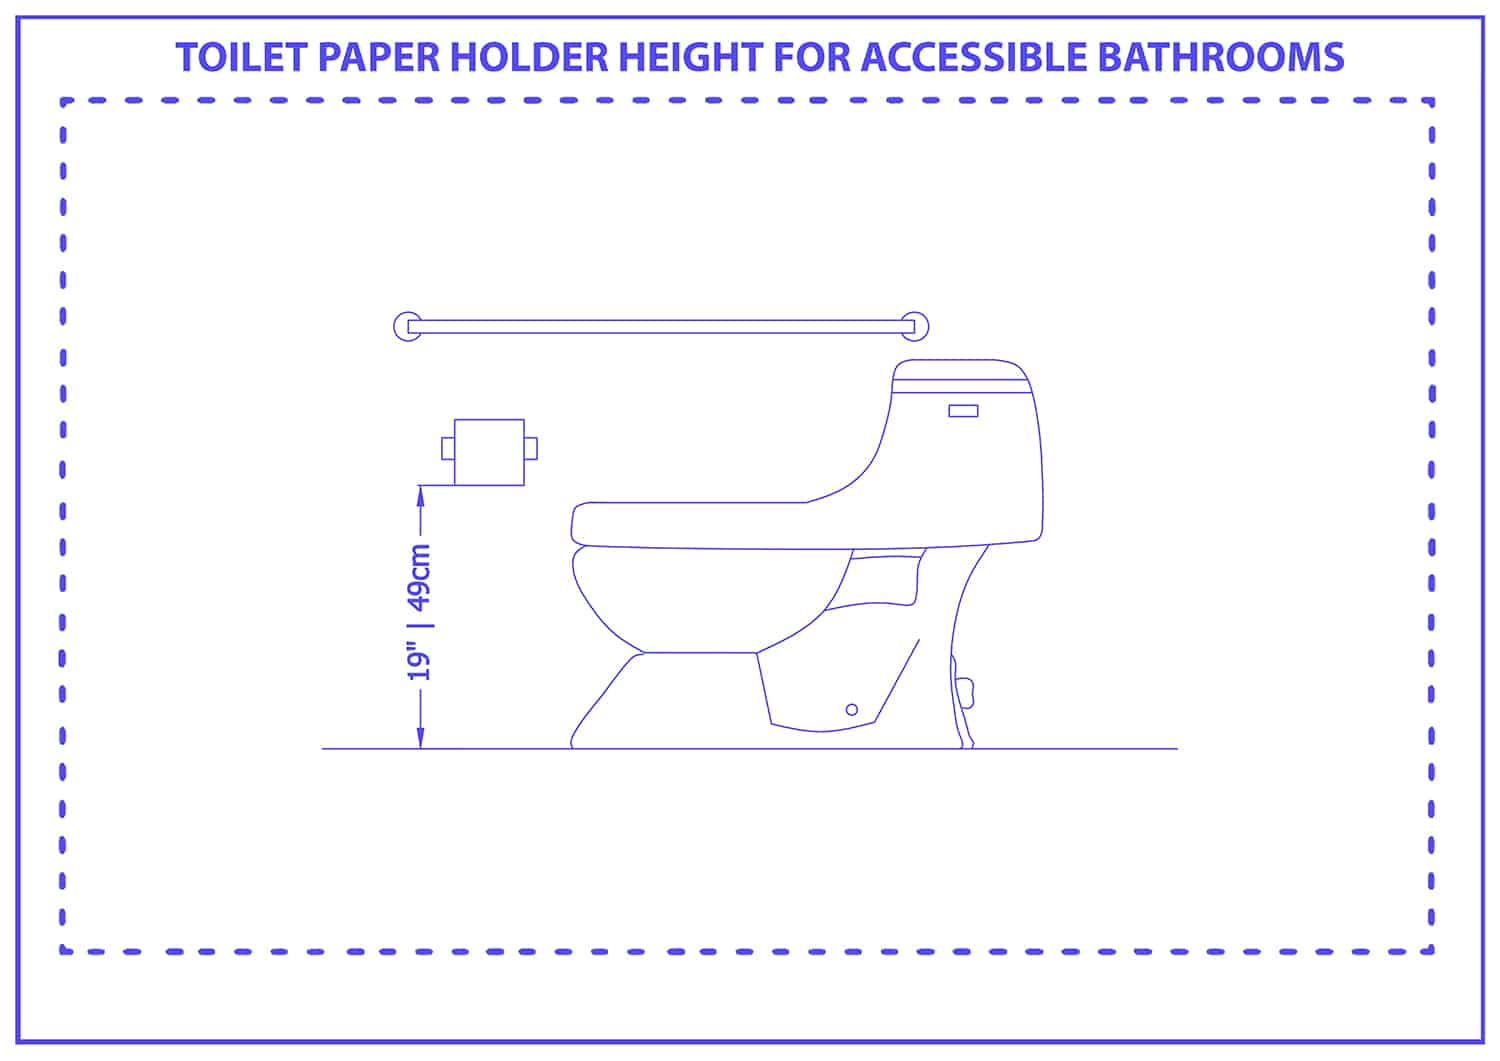 Toilet paper holder height for accessible bathrooms